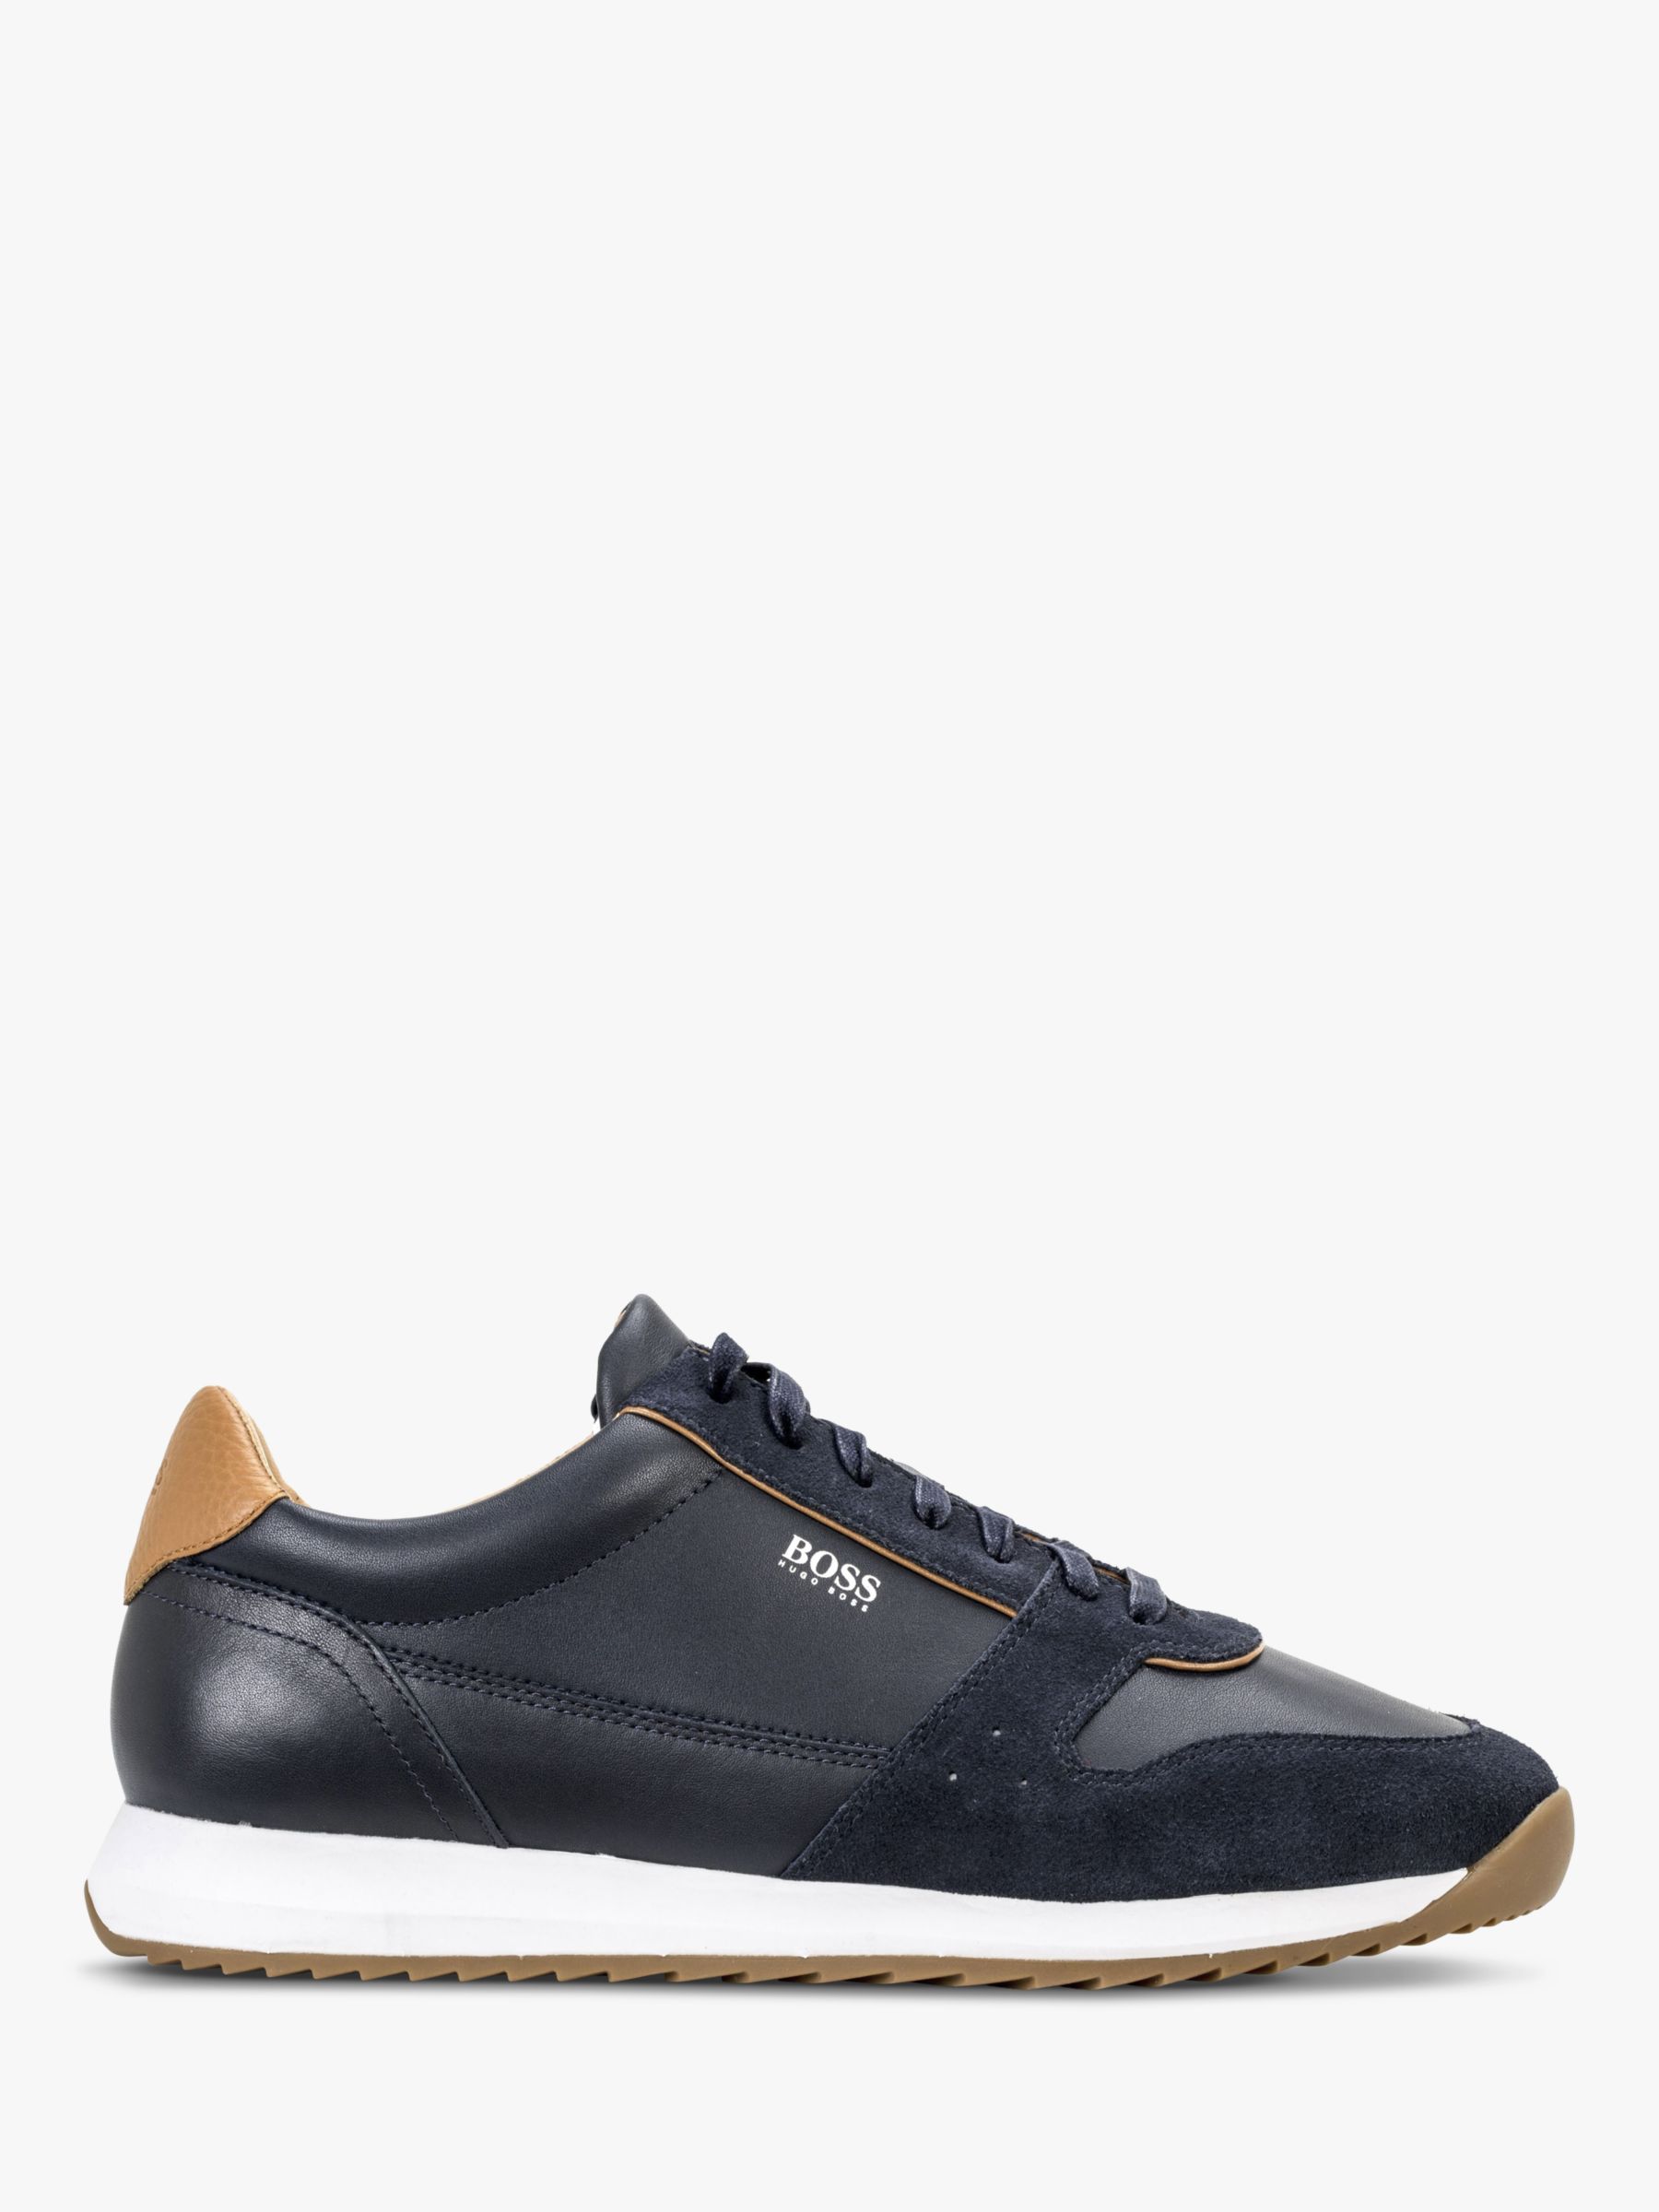 BOSS Sonic Trainers | Navy at John Lewis & Partners